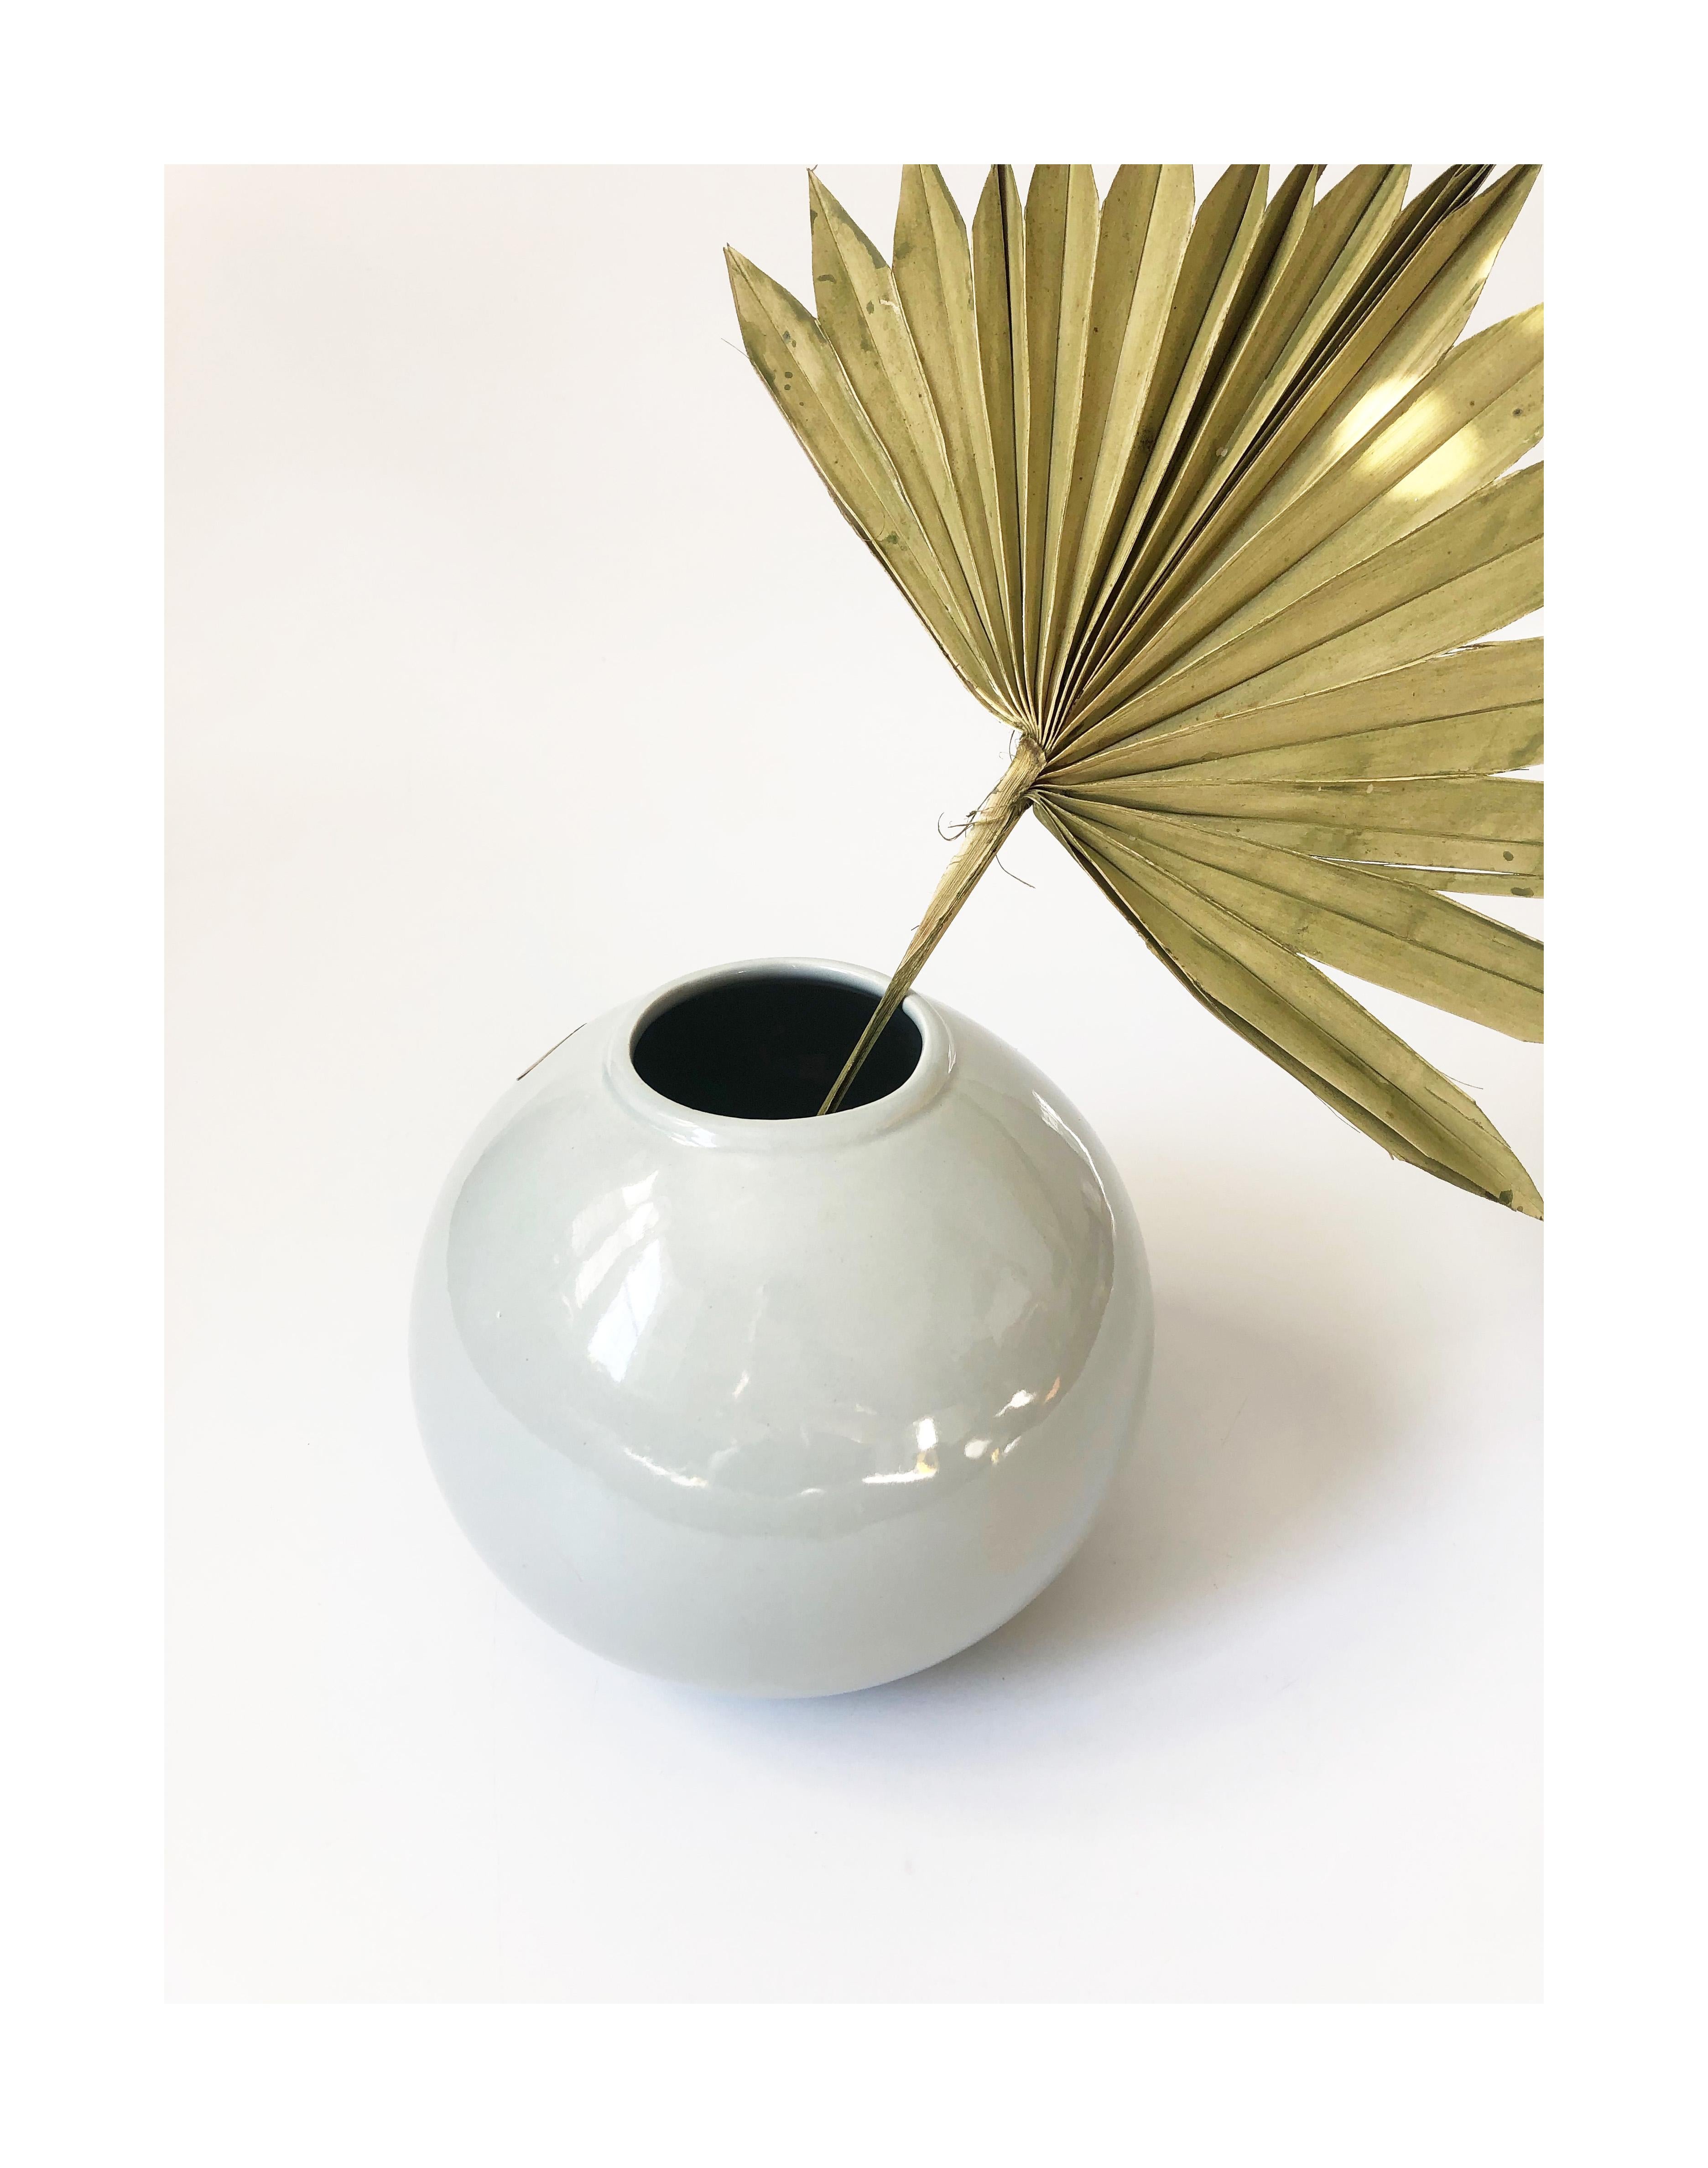 A vintage 80s ceramic sphere vase. High gloss pale gray finish in a simple modern shape. The orginal sticker by Seville Industries is still attached.